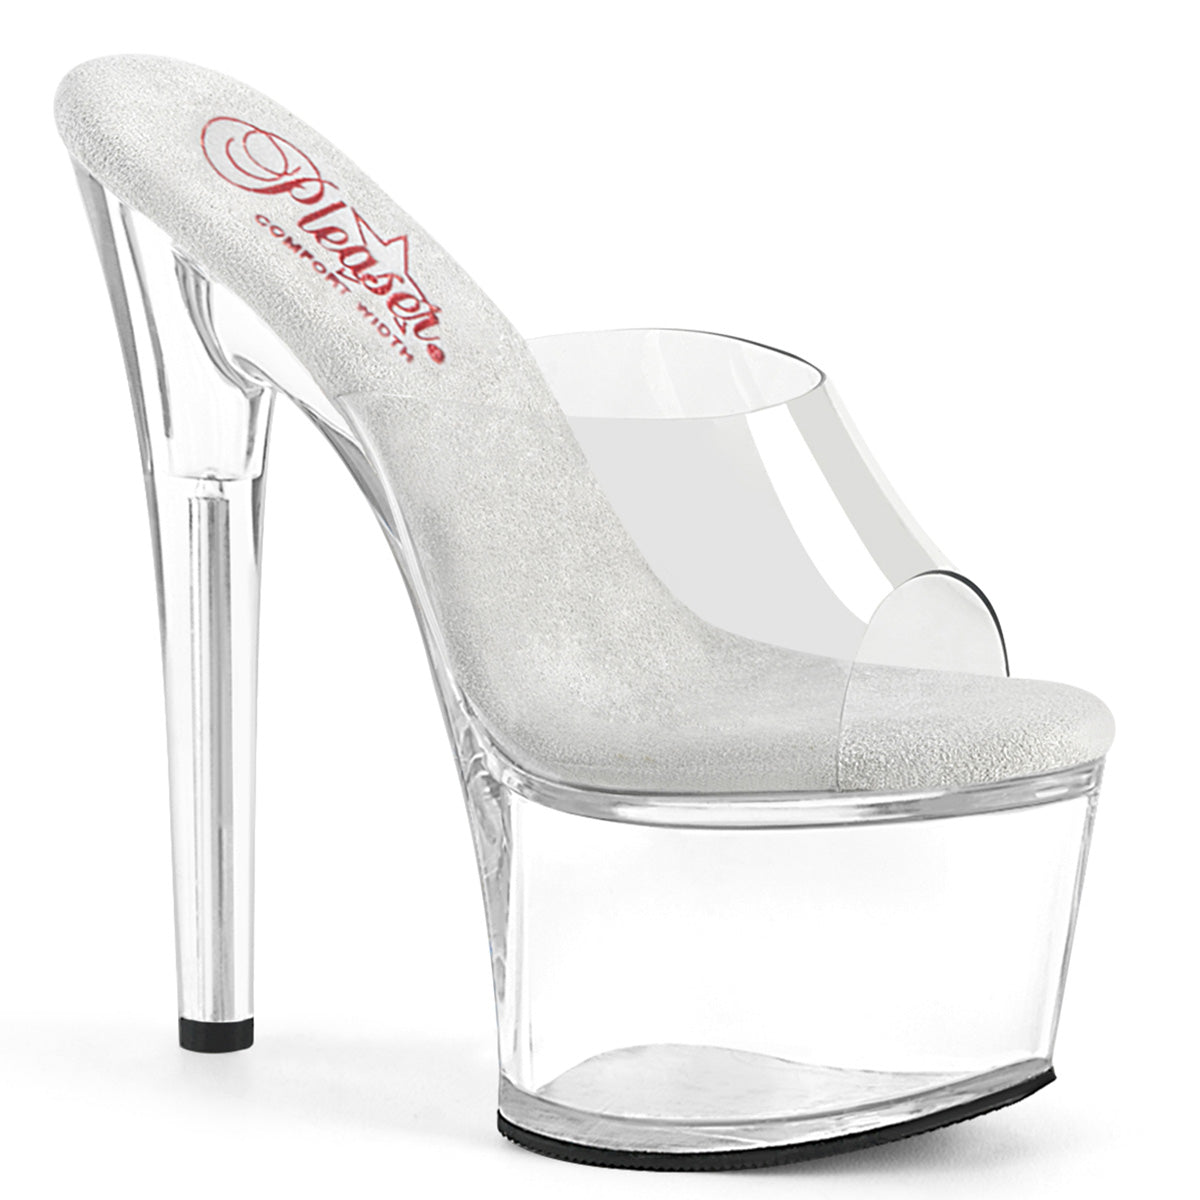 7 Inch Heel PASSION-701 Clear